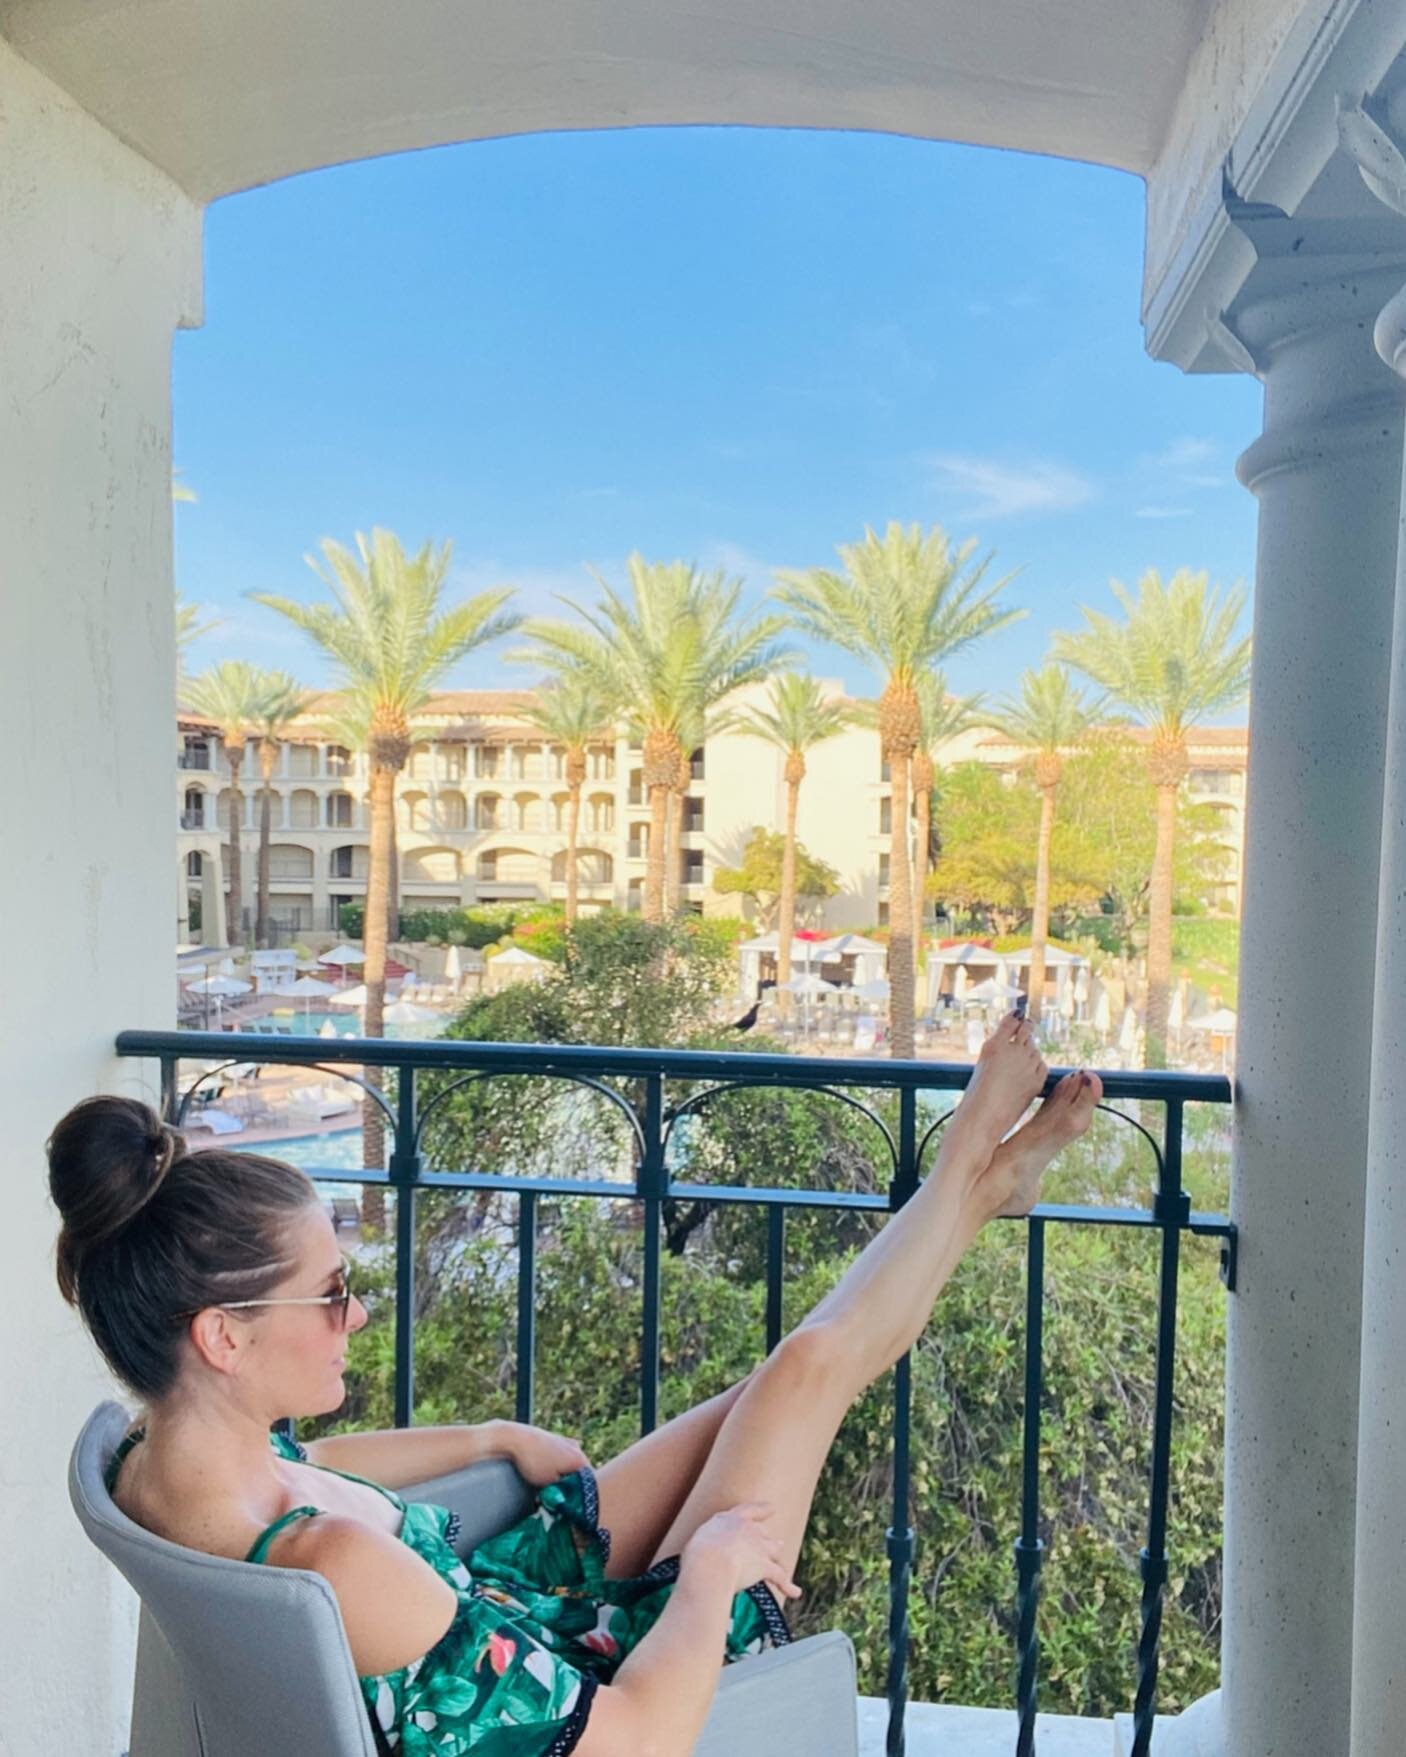 Planning a summer vacation and looking for ways to save? Sit back and relax, I&rsquo;ve got you covered. A few tips to consider:

1. Look to off-season destinations. Think like a contrarian and you'll avoid the crowds and save some cash. Desert desti